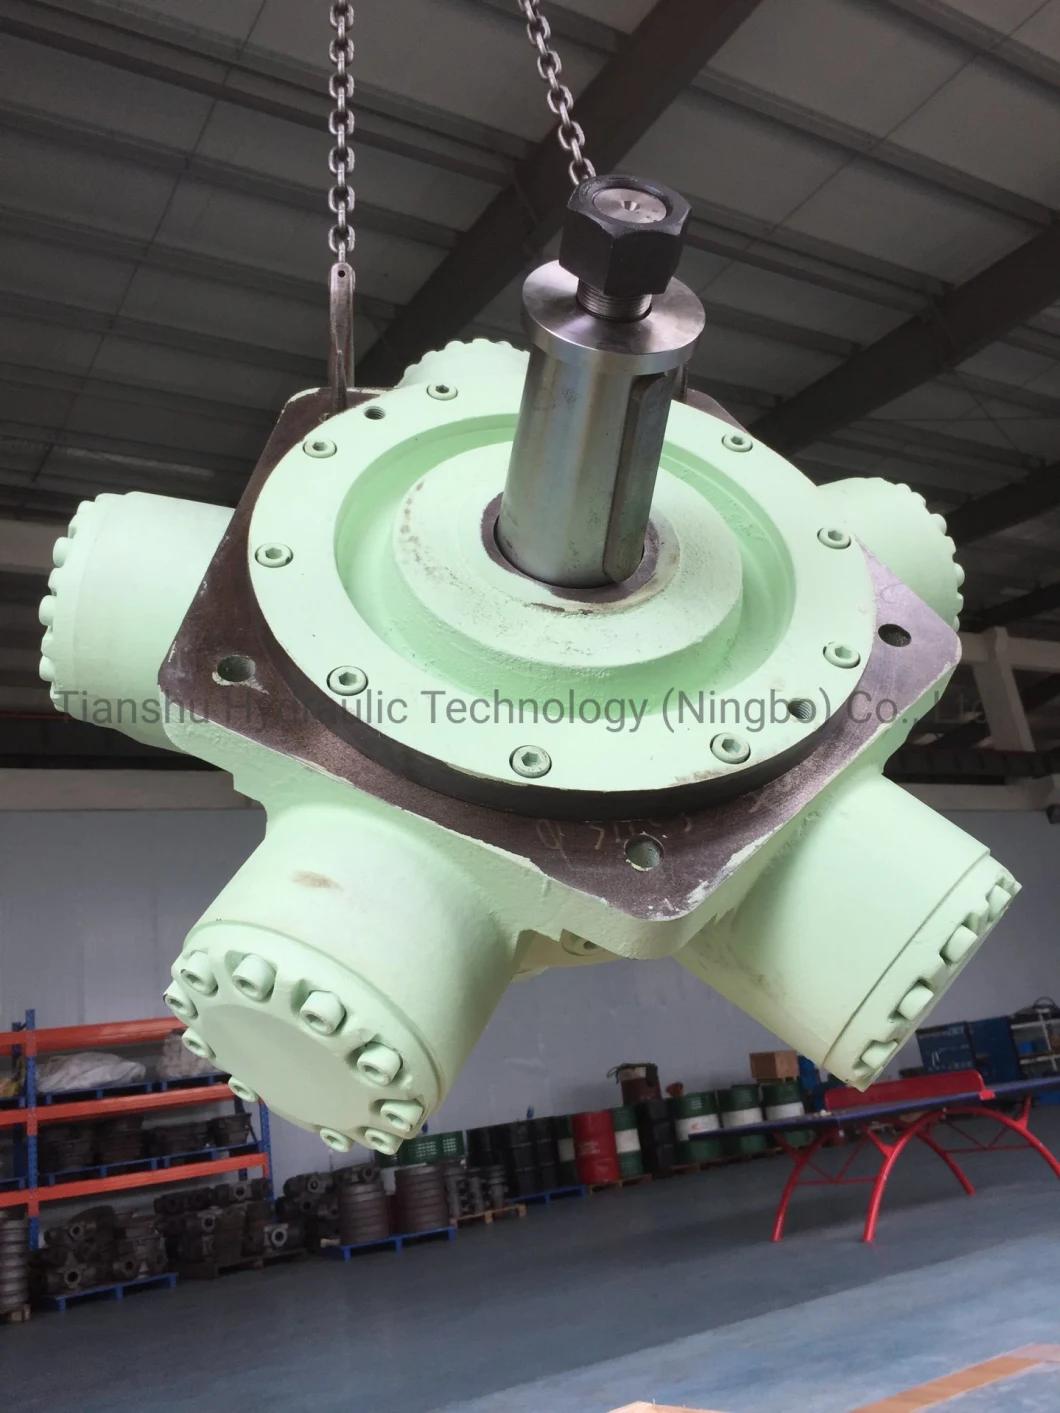 Staffa Hydraulic Motor Large Torque Low Speed for Injection Molding Machine/Marine Deck Machinery/Construction Machinery/Coal Mine Machine Use